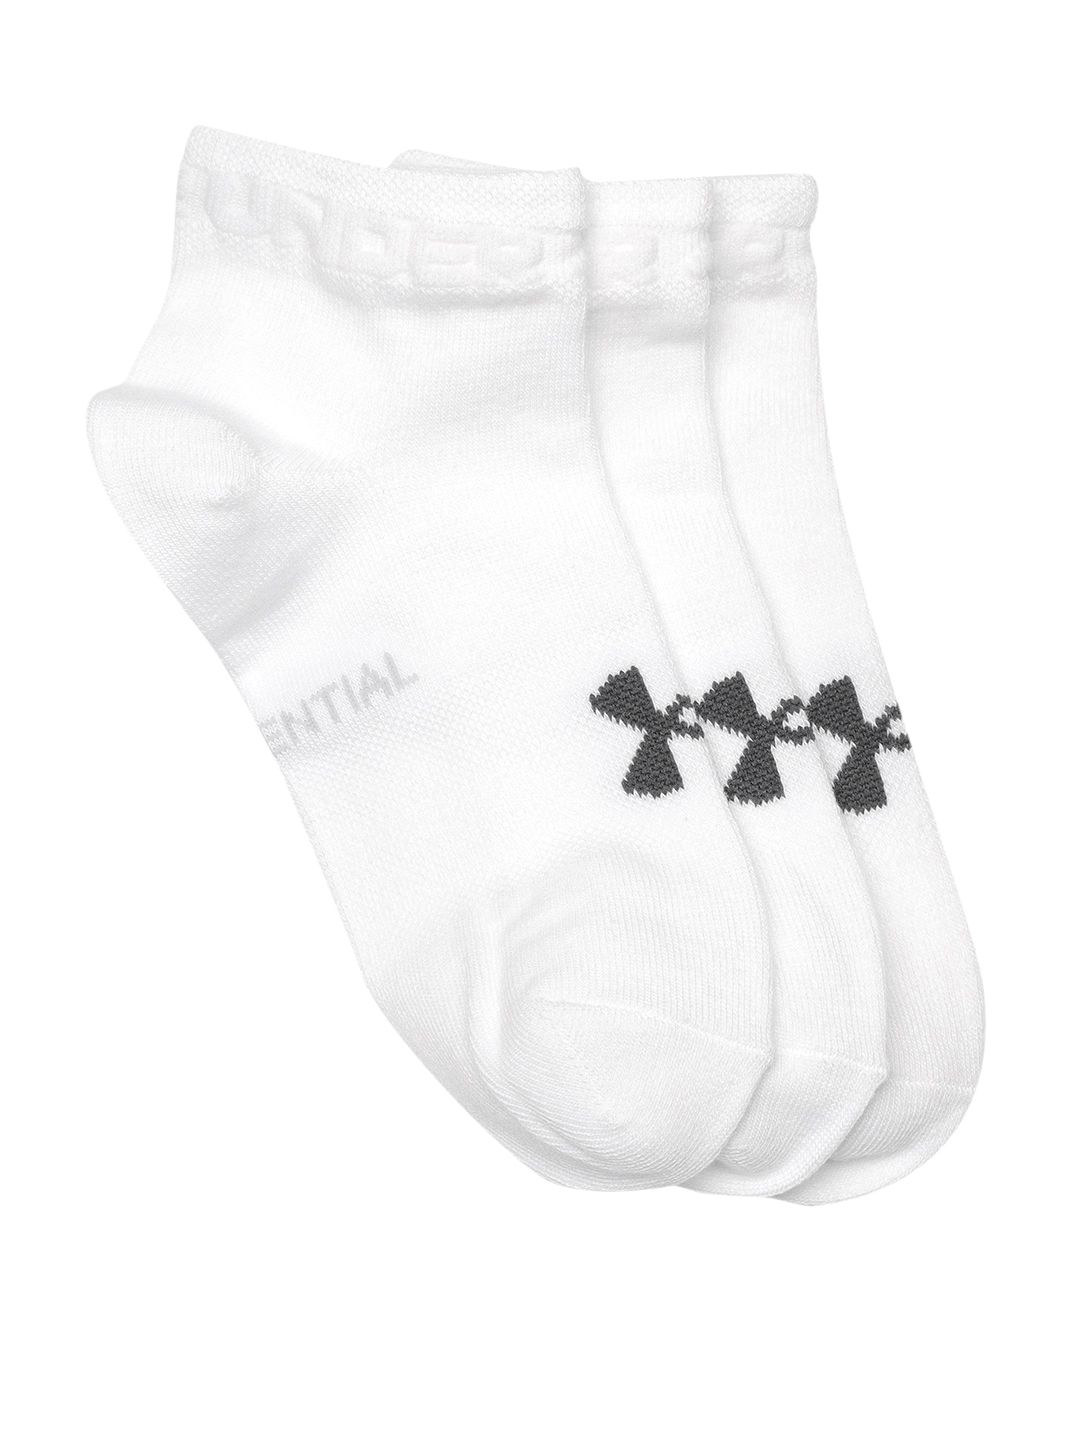 UNDER ARMOUR Unisex Pack of 3 White BrandLogo Pattern Essential Low Cut Ankle Length Socks Price in India